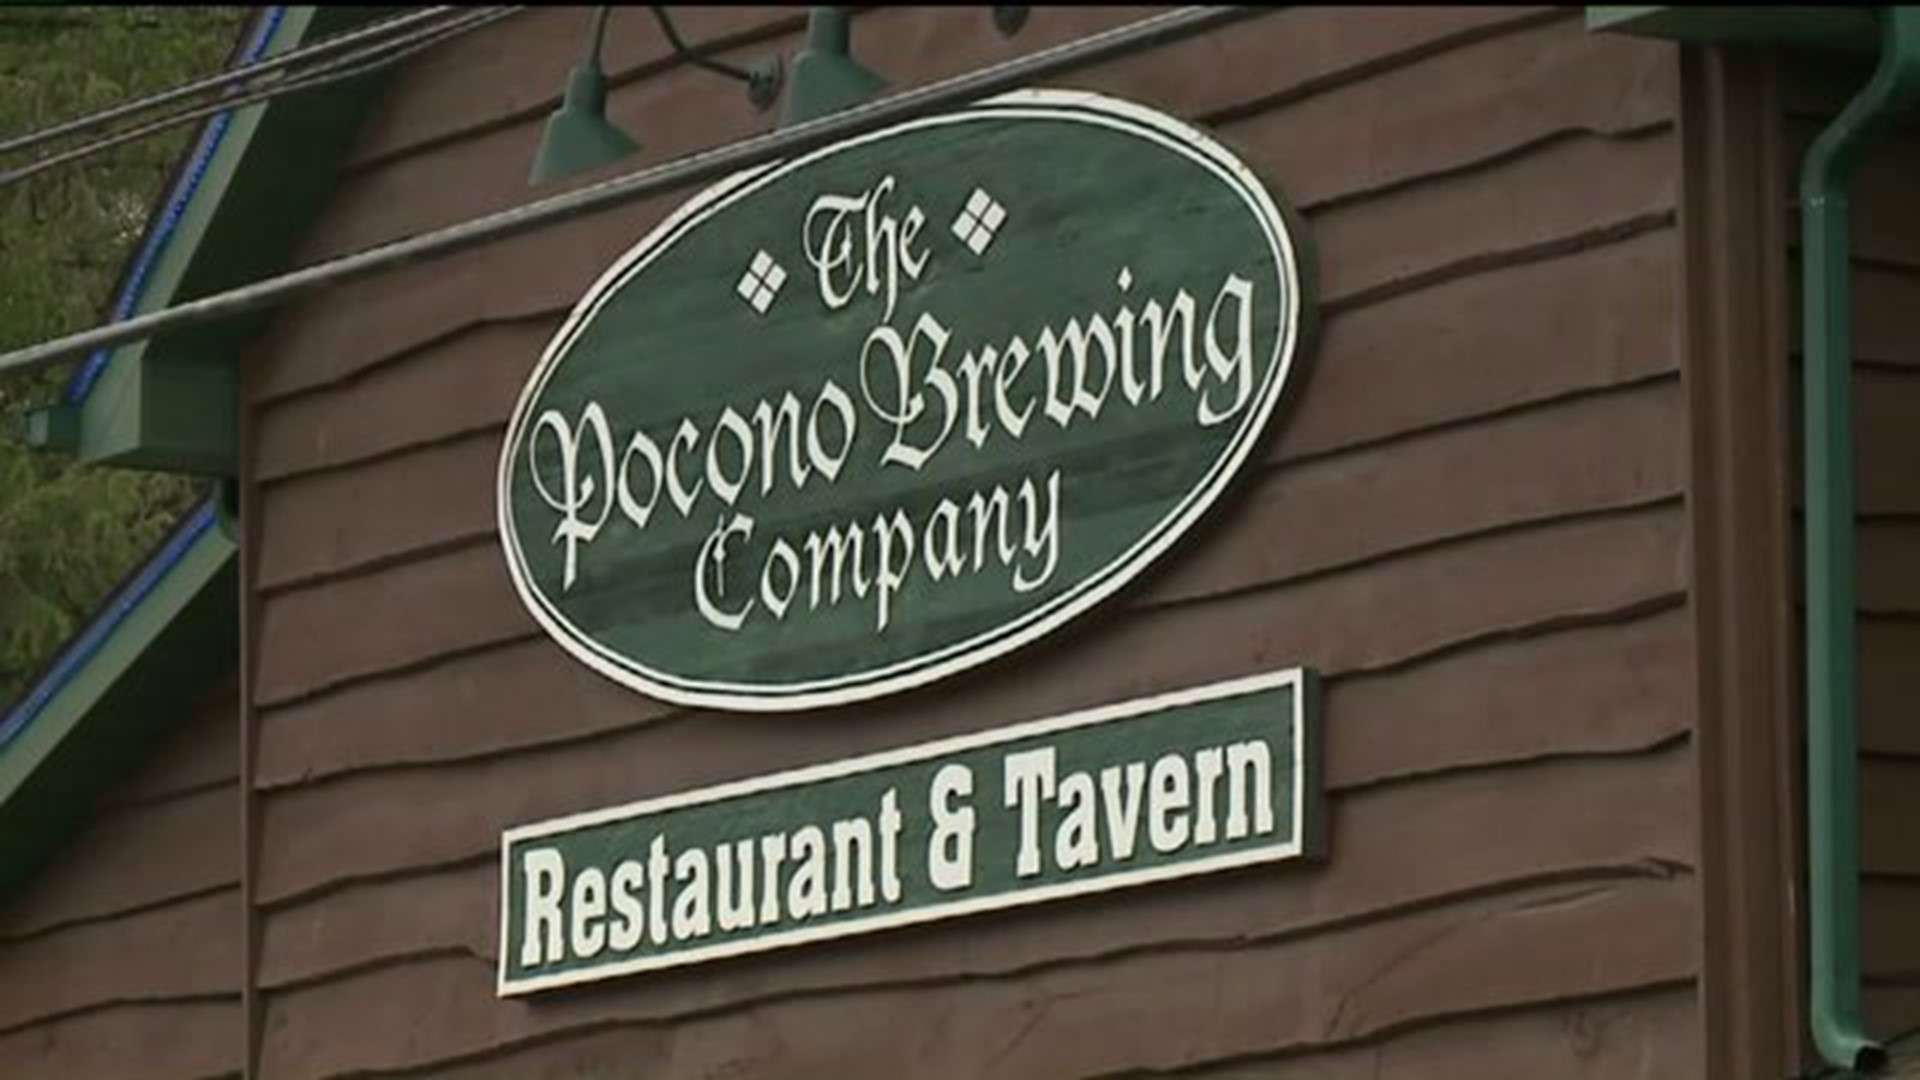 Restaurant in the Poconos to Reopen Come Spring